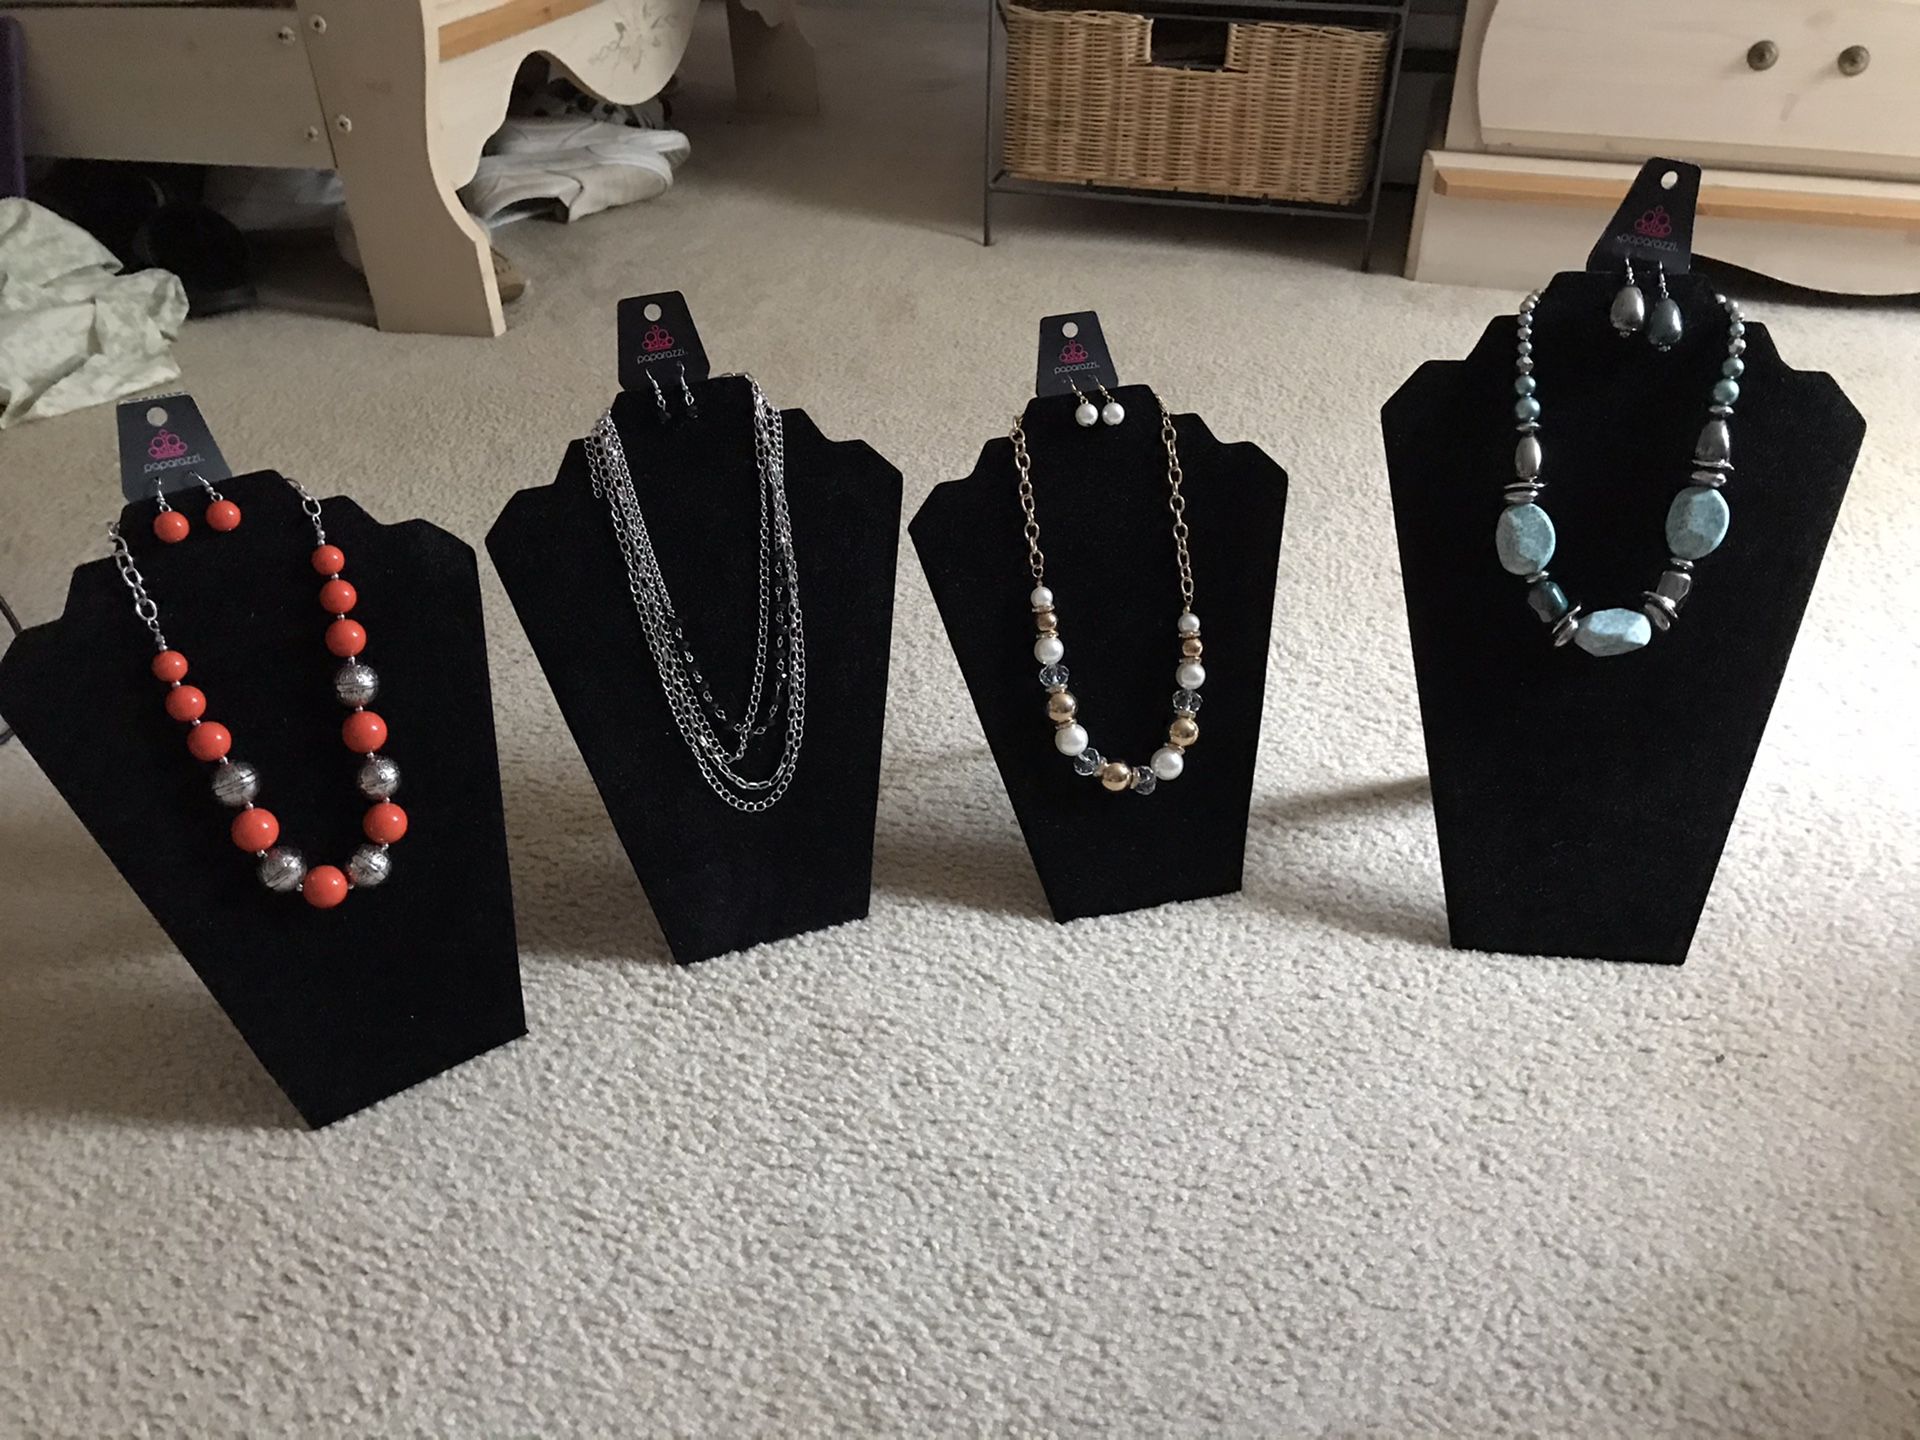 4 necklace sets for 20.00